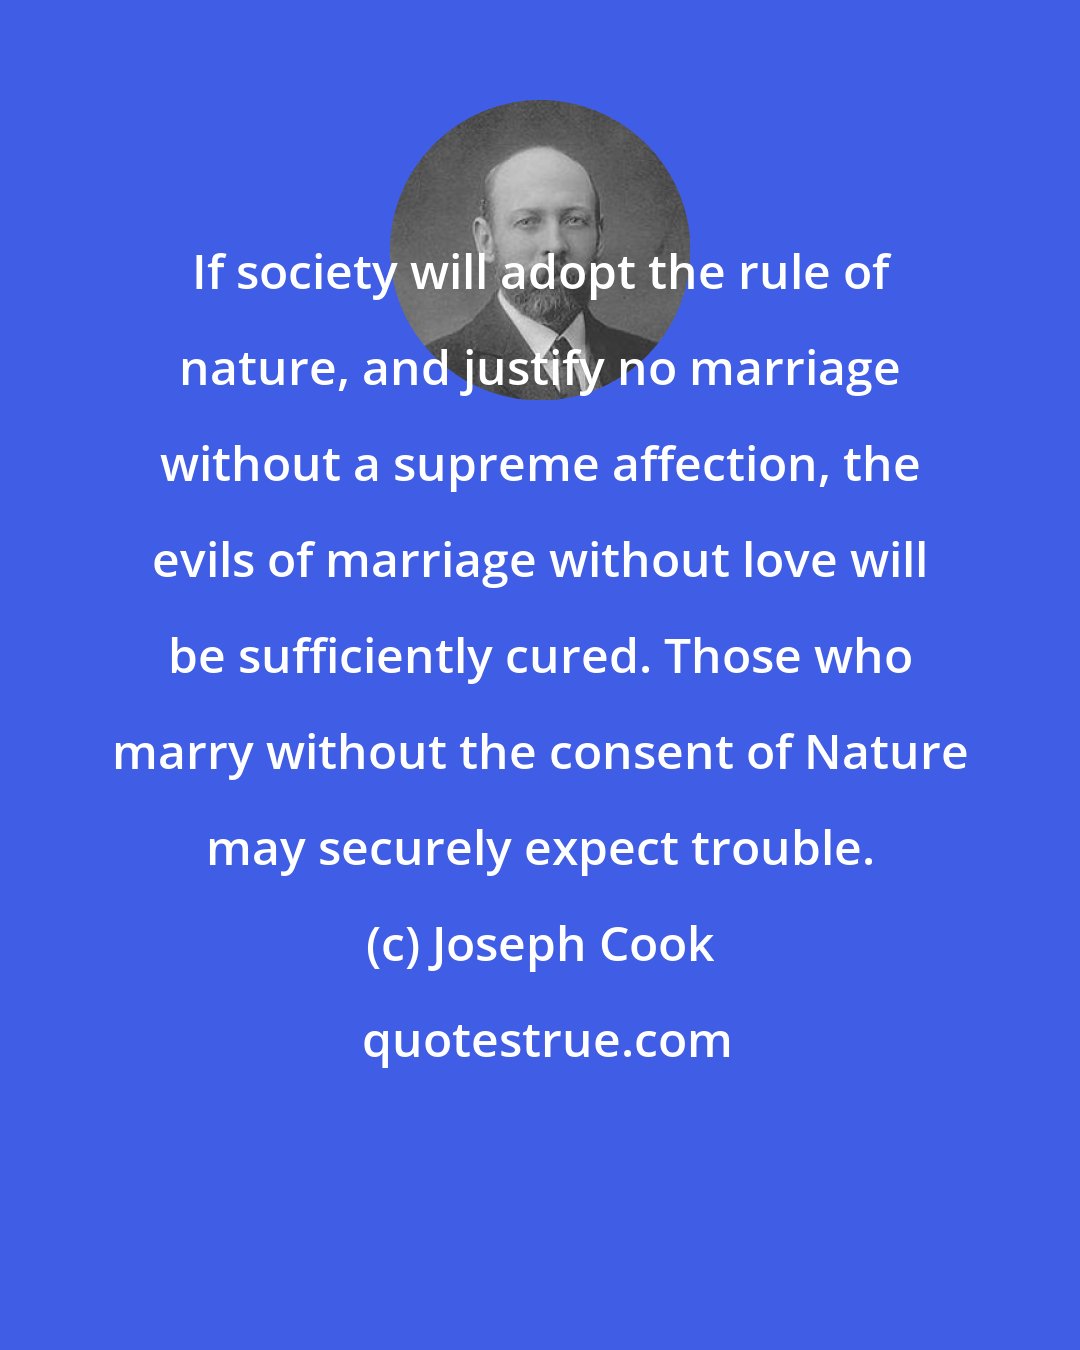 Joseph Cook: If society will adopt the rule of nature, and justify no marriage without a supreme affection, the evils of marriage without love will be sufficiently cured. Those who marry without the consent of Nature may securely expect trouble.